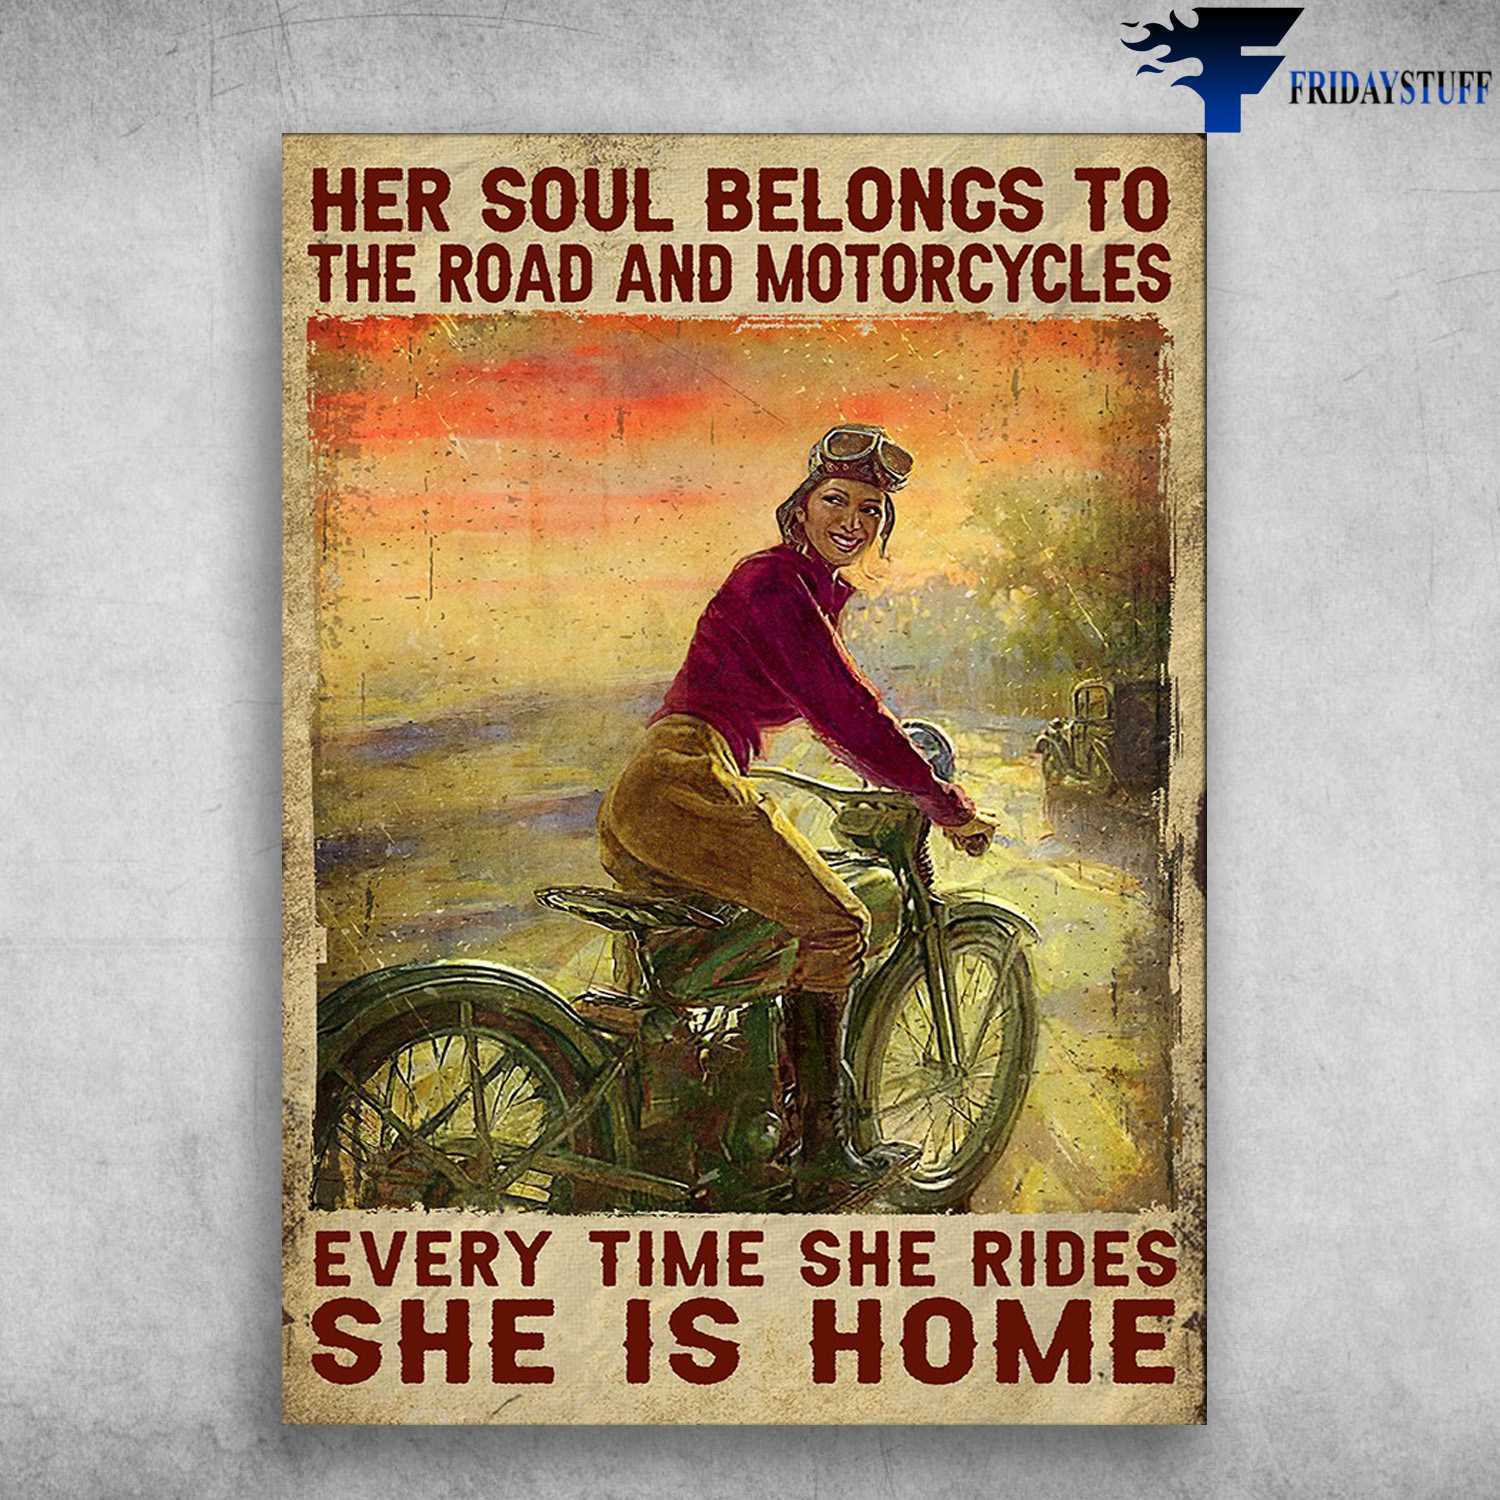 Motorbike Lover, Lady Riding - Her Soul Belongs To, The Road And Motorcycles, Every Time She Rides, She Is Home, Biker Riding